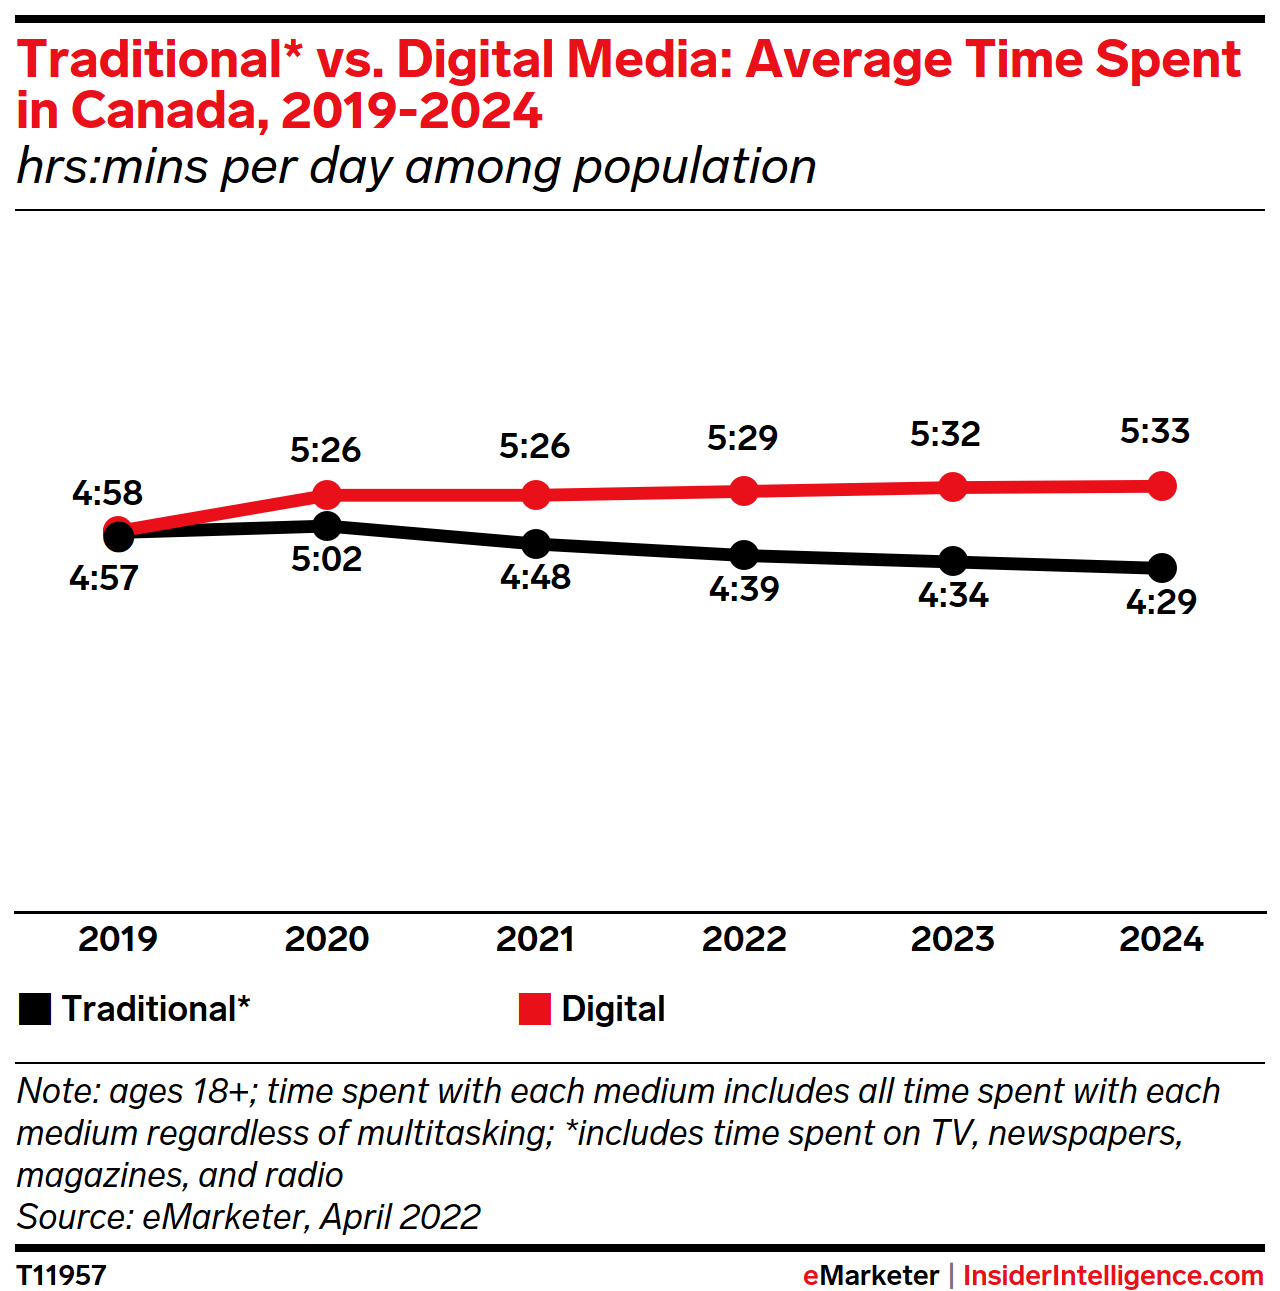 Traditional* vs. Digital Media: Average Time Spent in Canada, 2019-2024 (hrs:mins per day among population)